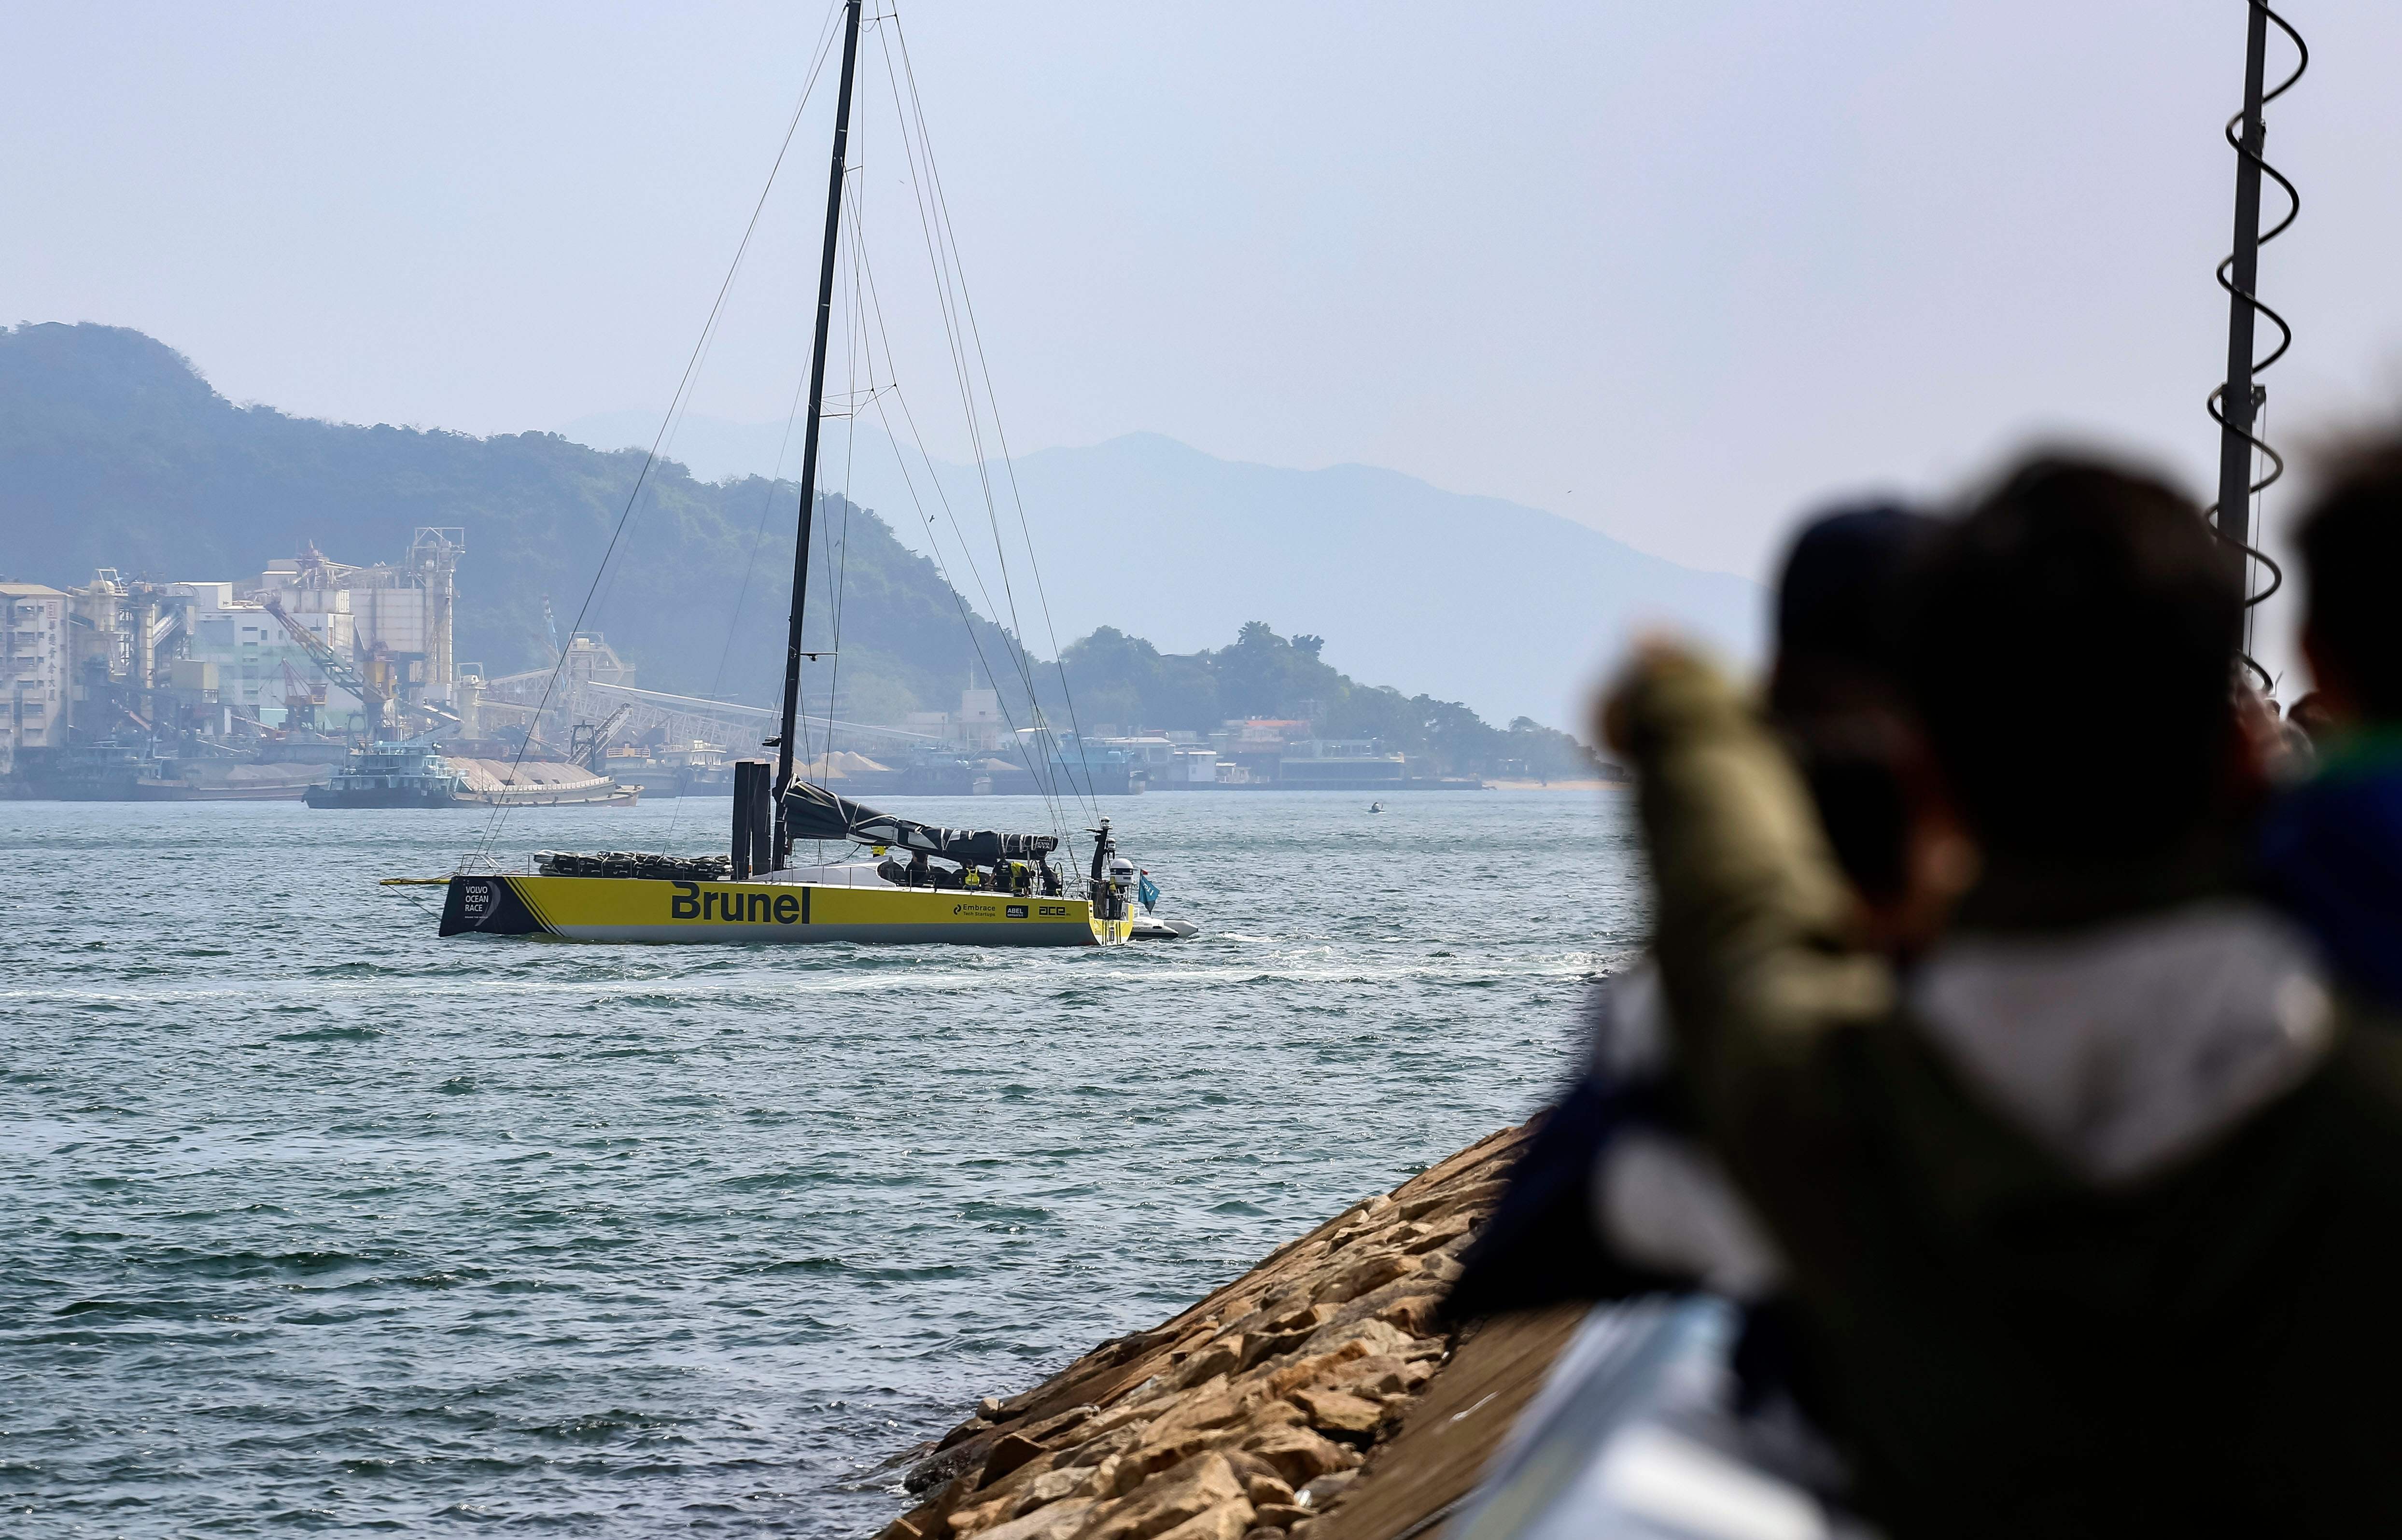 Injured Team Brunel sailor Annie Lush had to sit out the fourth leg of the Volvo Ocean Race, which finished in Hong Kong. Photo: AFP